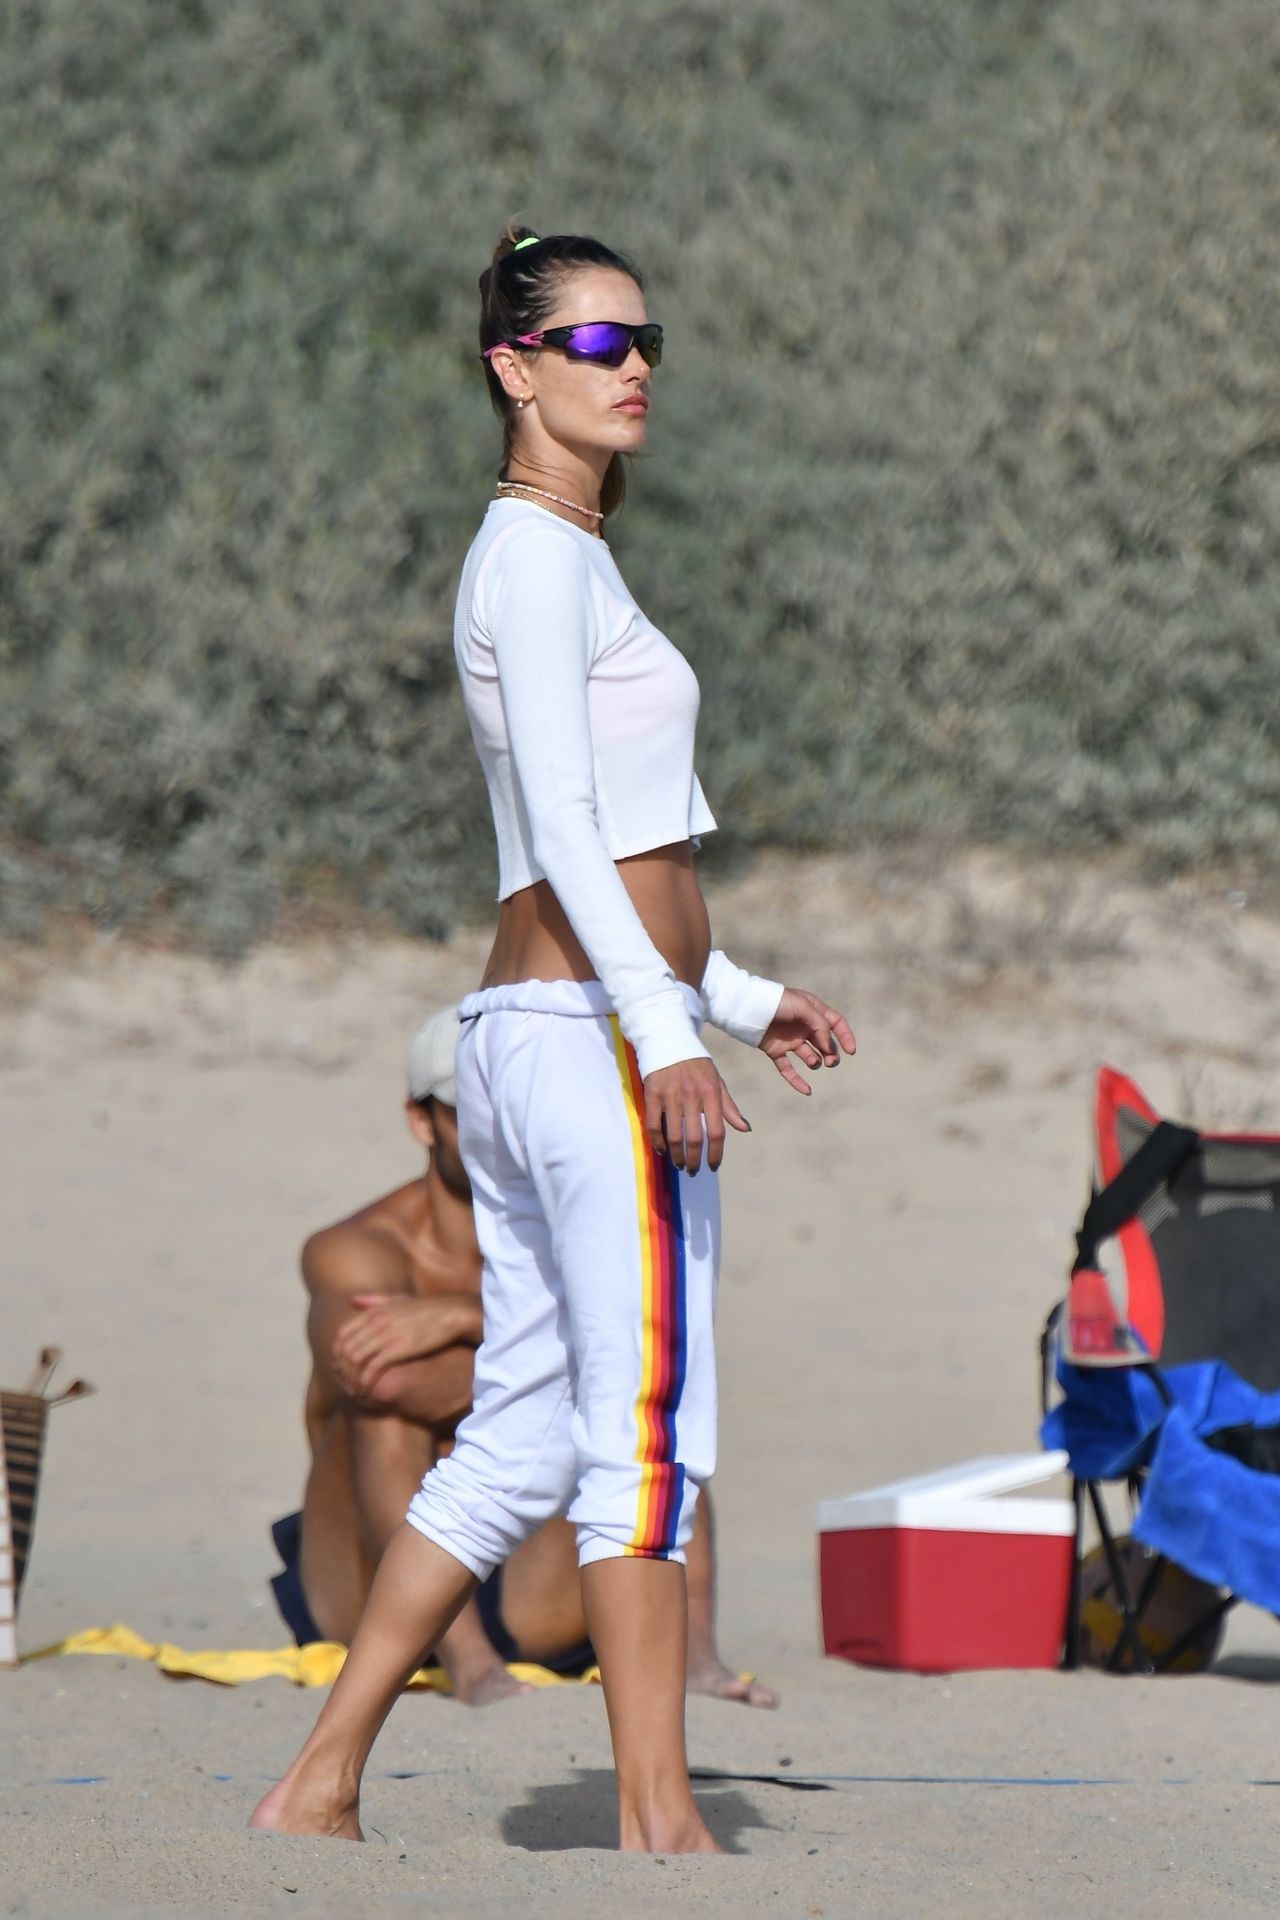 Alessandra Ambrosio Shows Off Her Abs as She Plays Beach Volleyb
all (116 Photos)